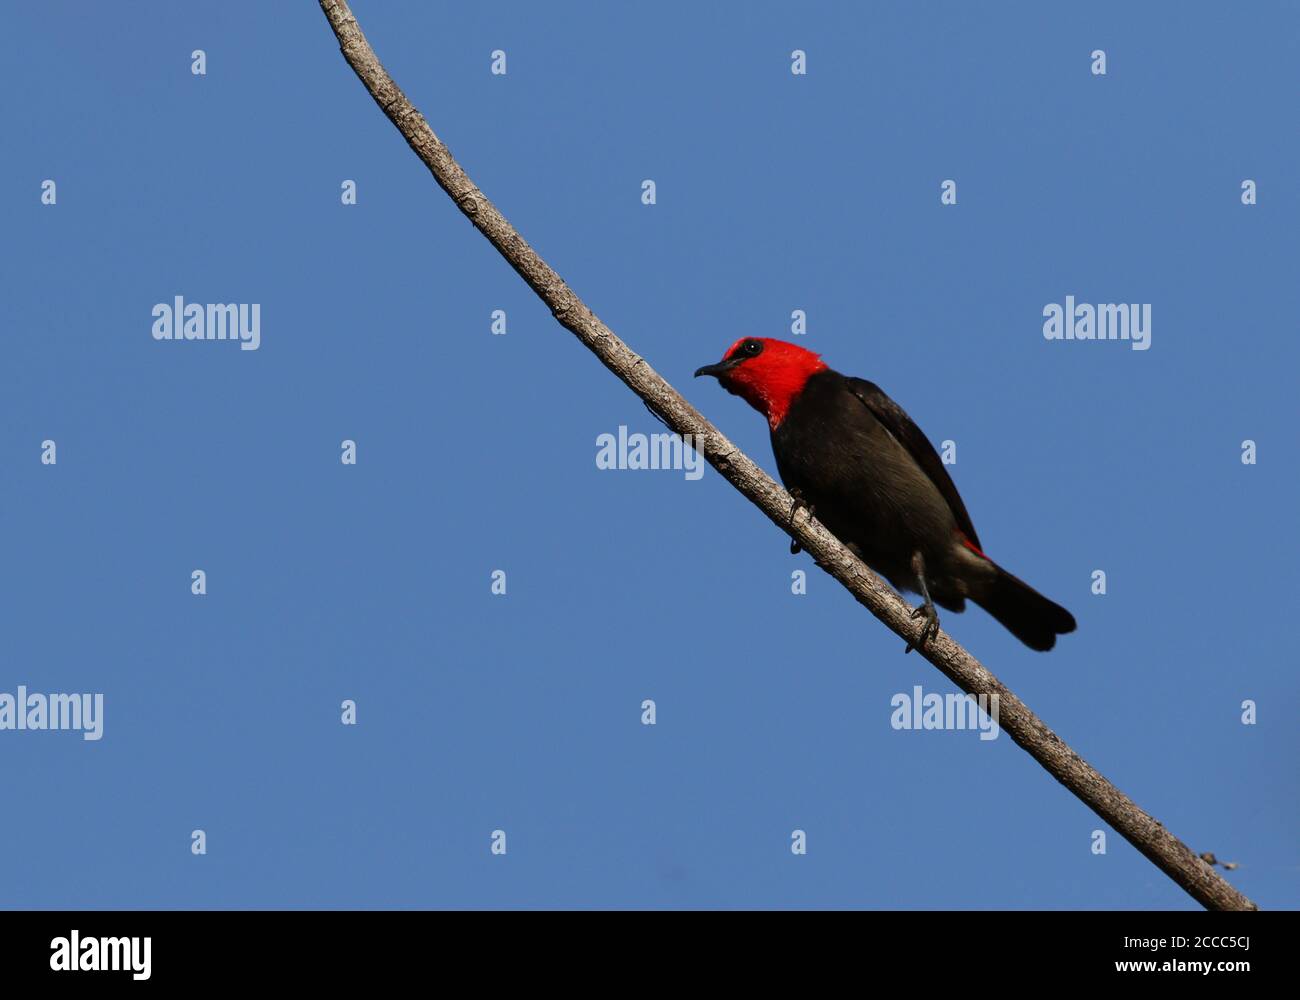 Sumba Myzomela (Myzomela dammermani) perched on a branch against a blue sky as background on Sumba, Indonesia. Stock Photo